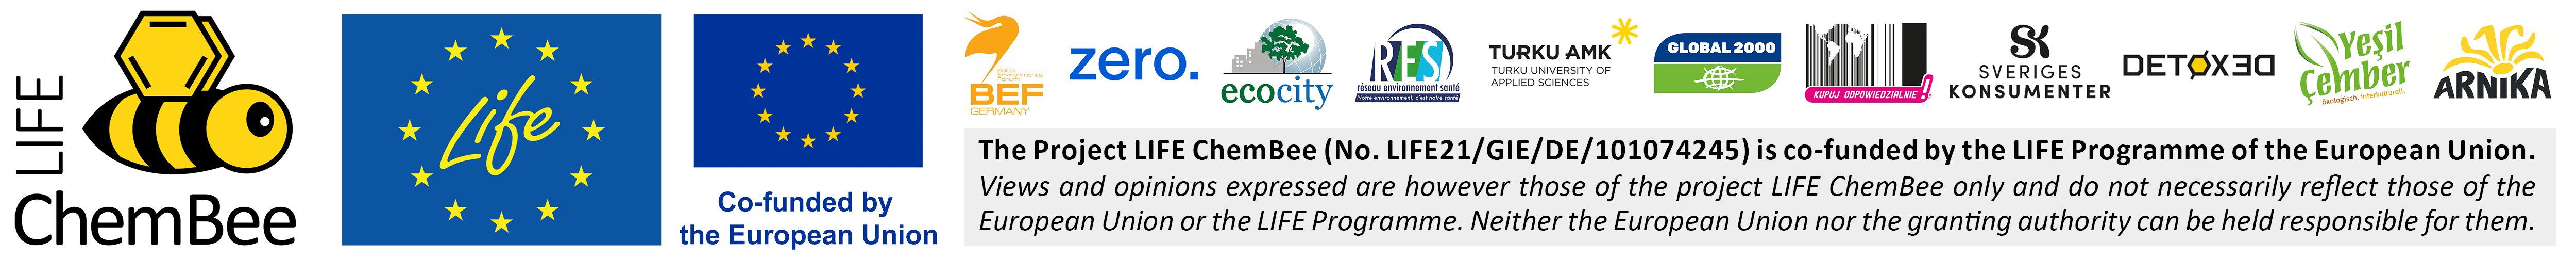 LIFE ChemBee logos. The Project LIFE ChemBee (No. LIFE21/GIE/DE/101074245) is funded by the LIFE Programme of the European Union.